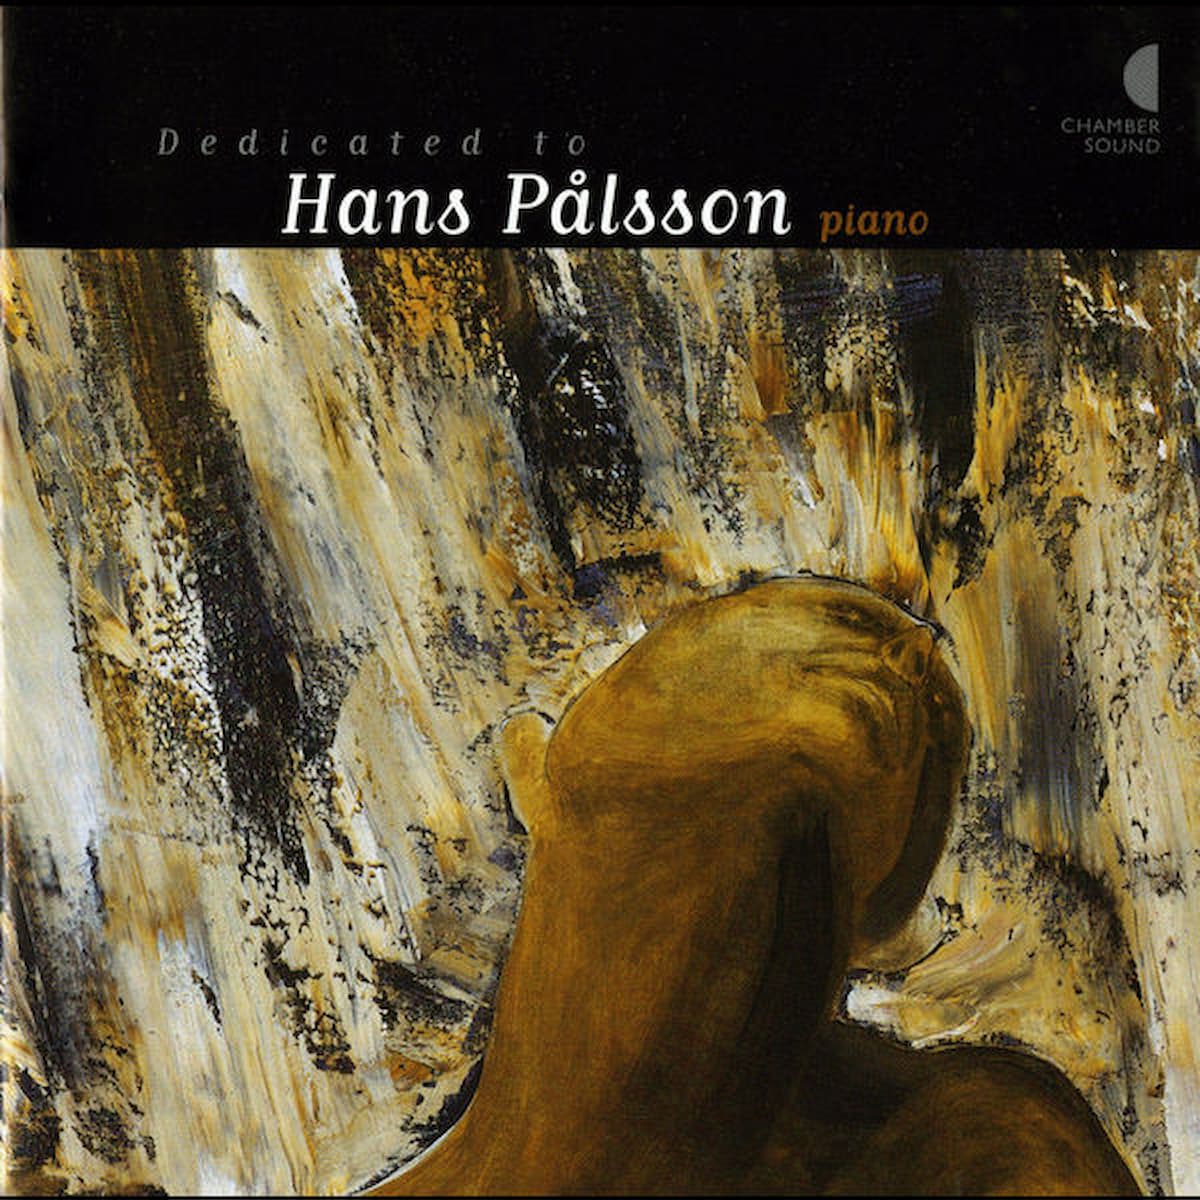 Record cover artwork for Dedicated to Hans Pålsson